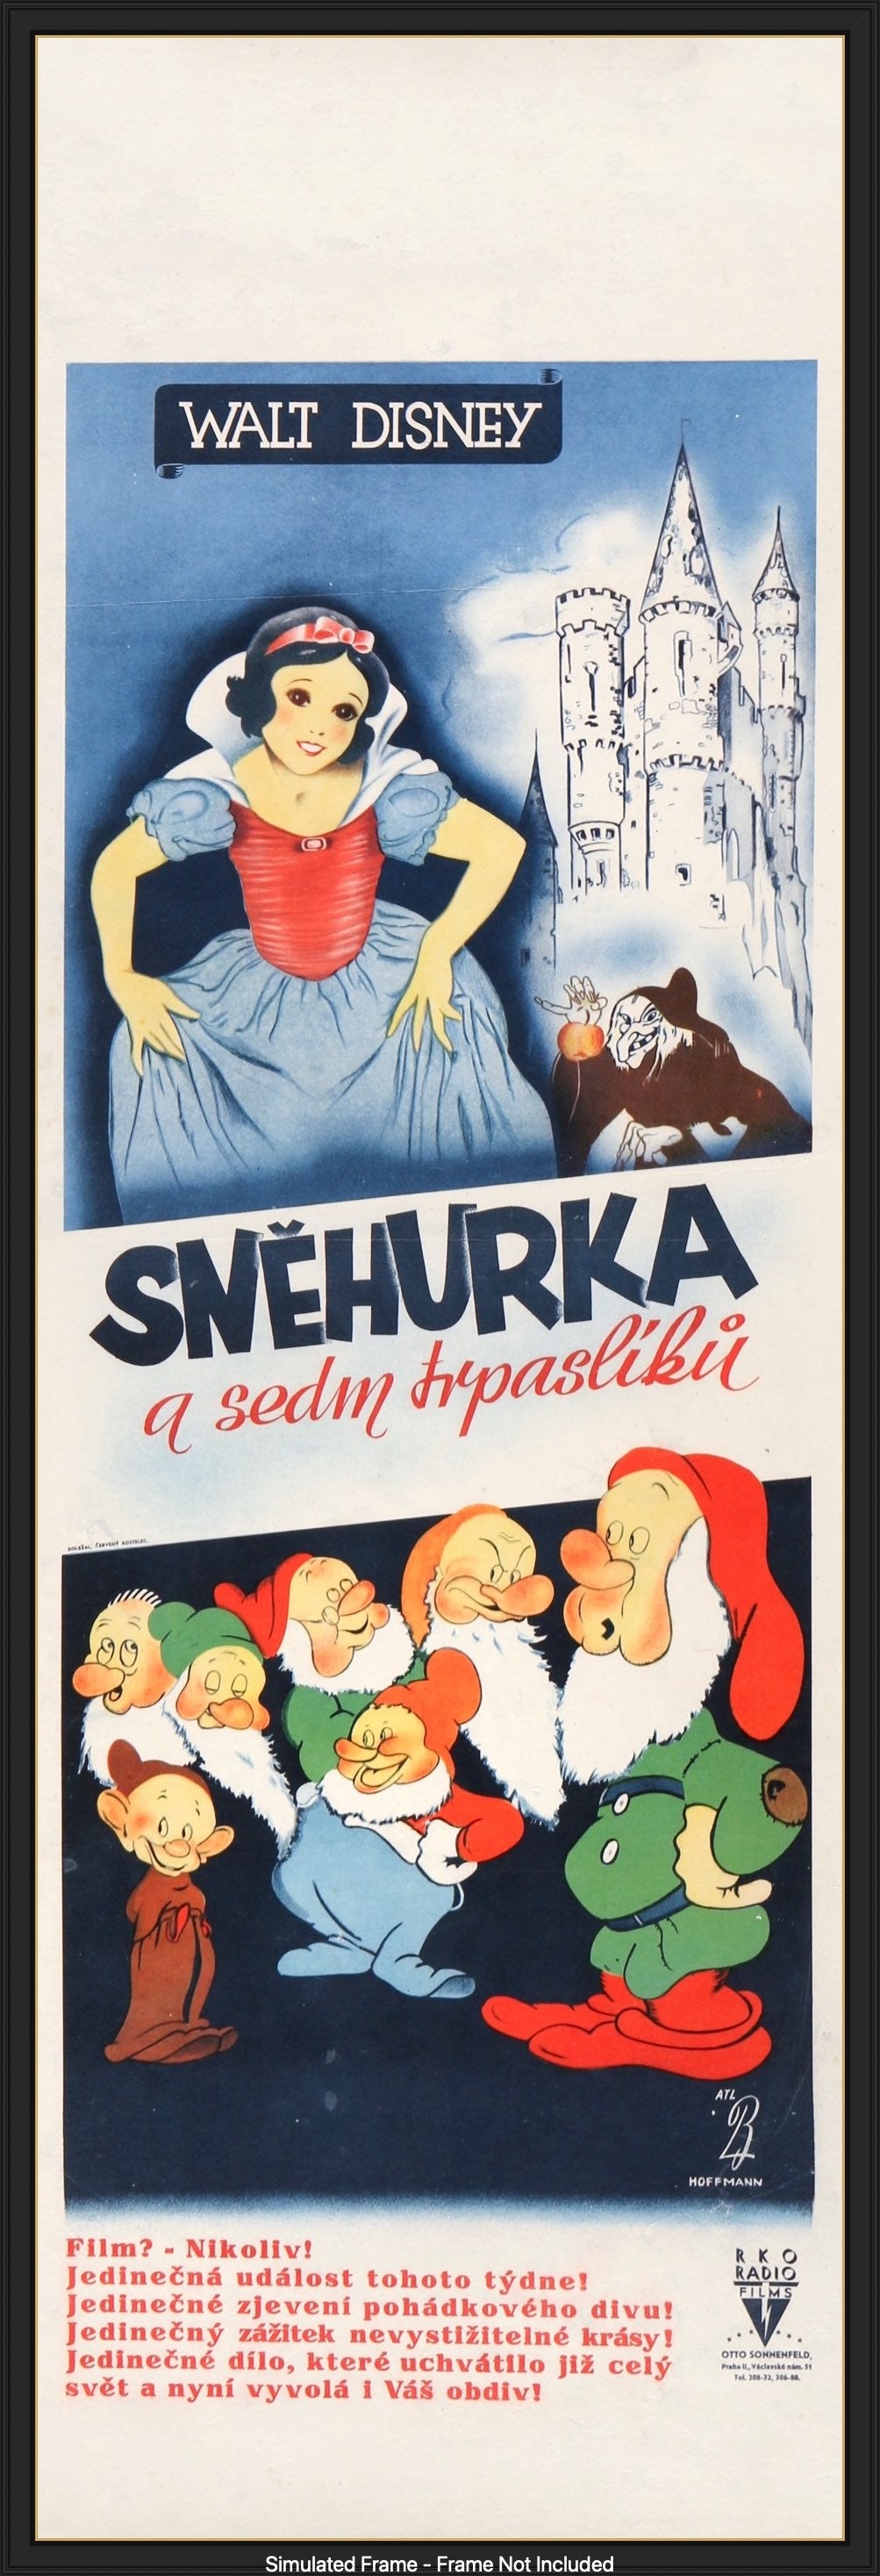 snow white and the seven dwarfs 1937 poster